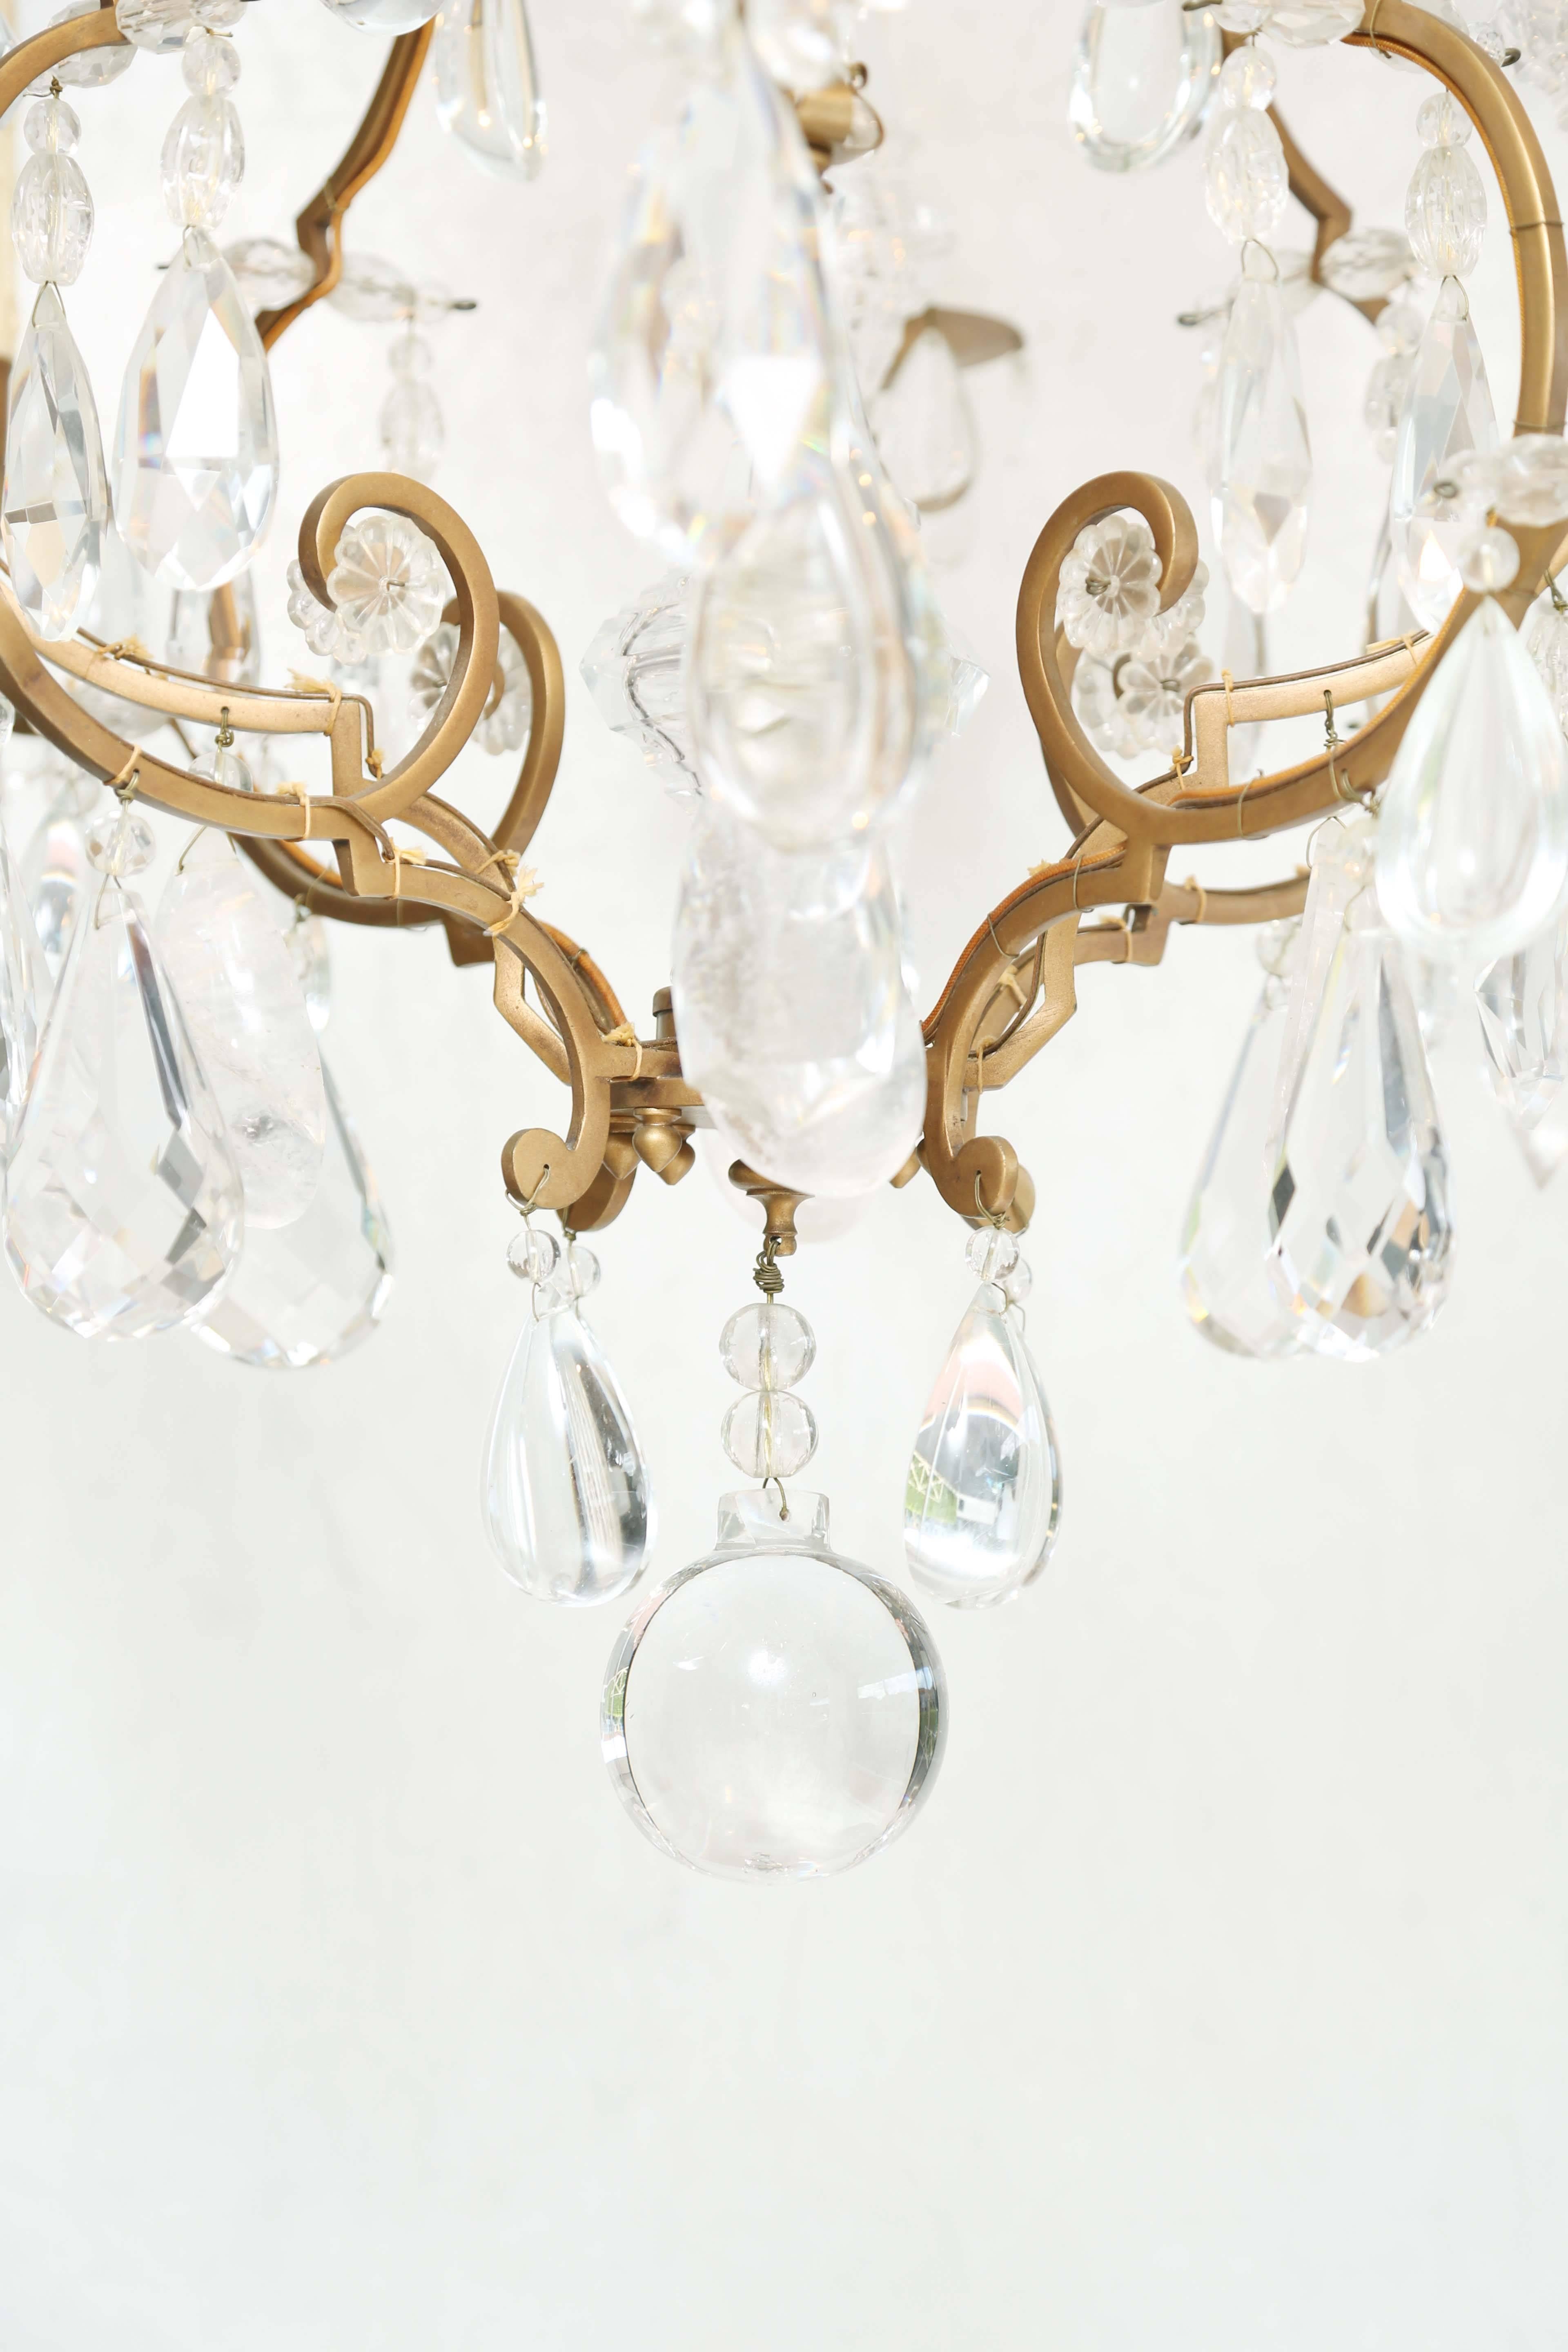 Chandelier, in the Louis XV taste, having a gilt bronze frame set with an interior rock crystal finial and mounted eight scrolled bronze candle branches, on two-tiers, hung with faceted, clear and rock crystal drops and flower heads, accented by cut